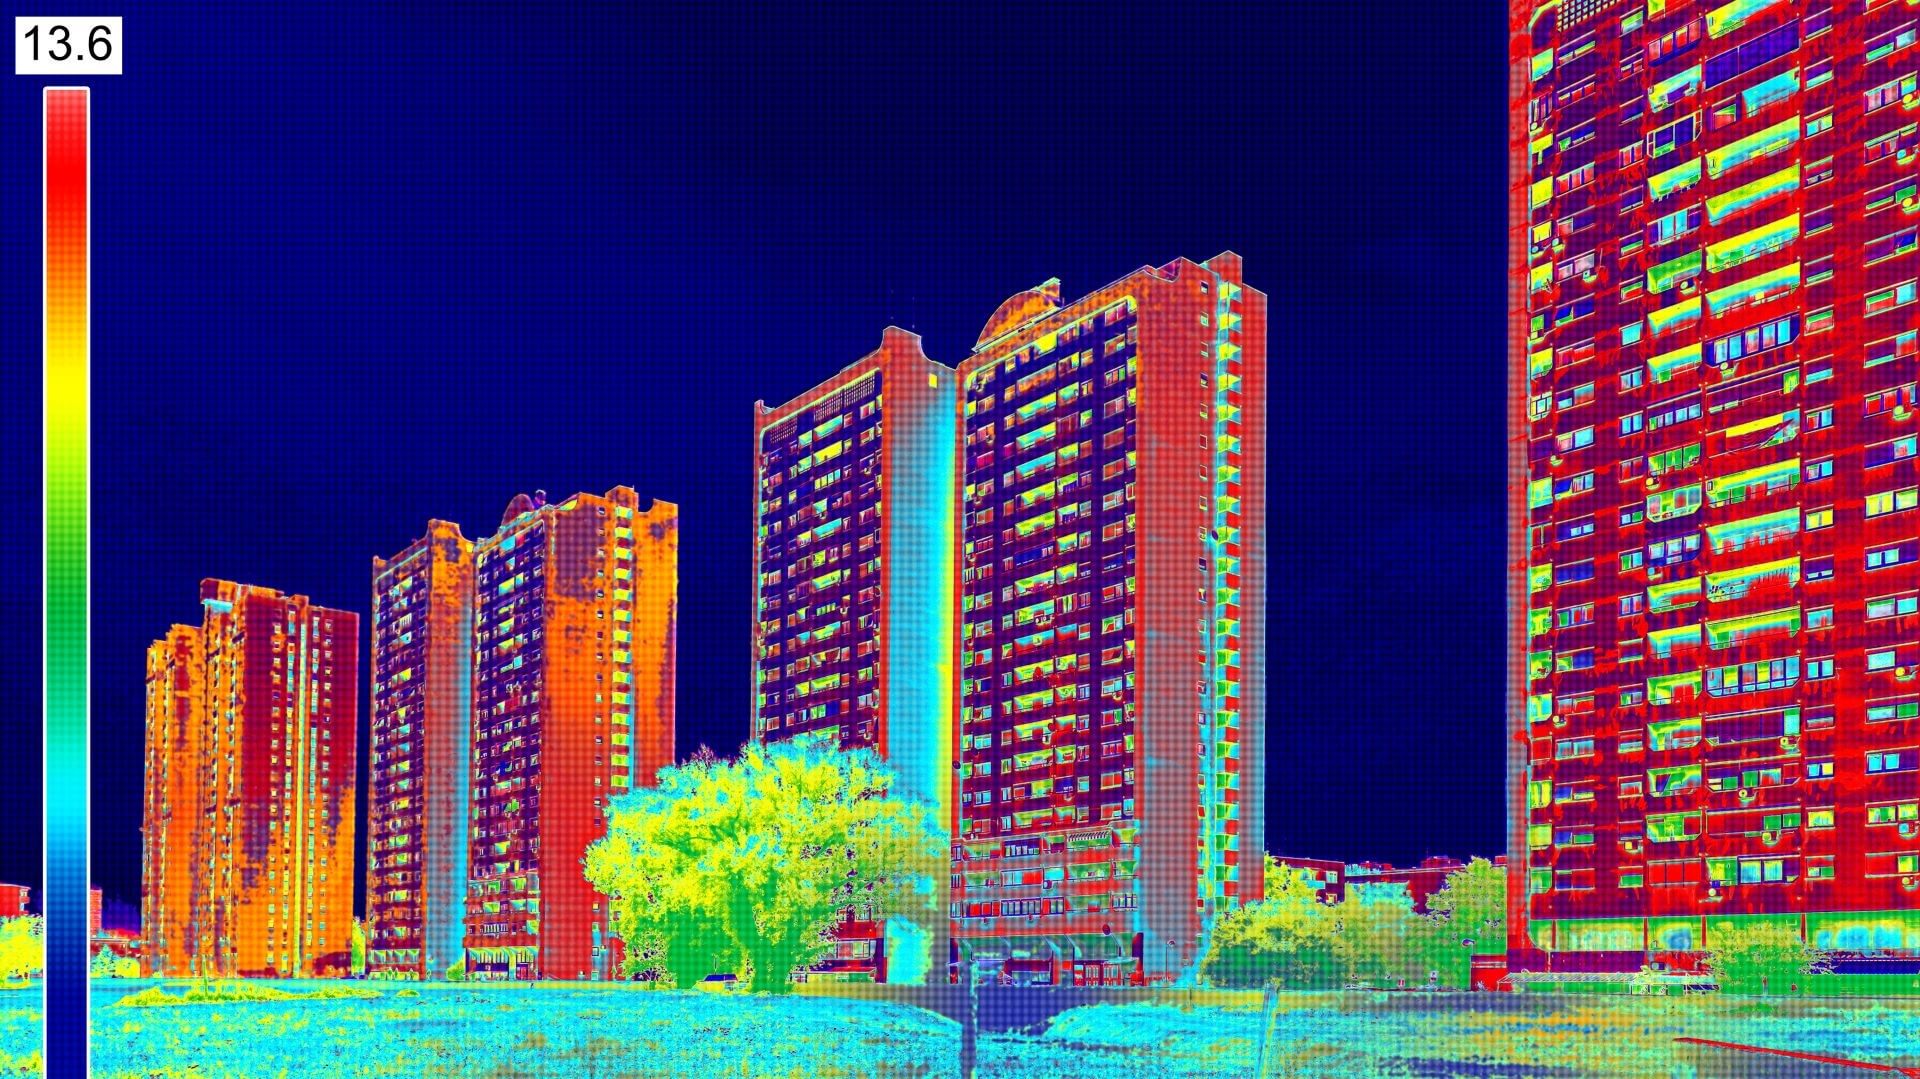 Thermal imaging heat map of a row of buildings